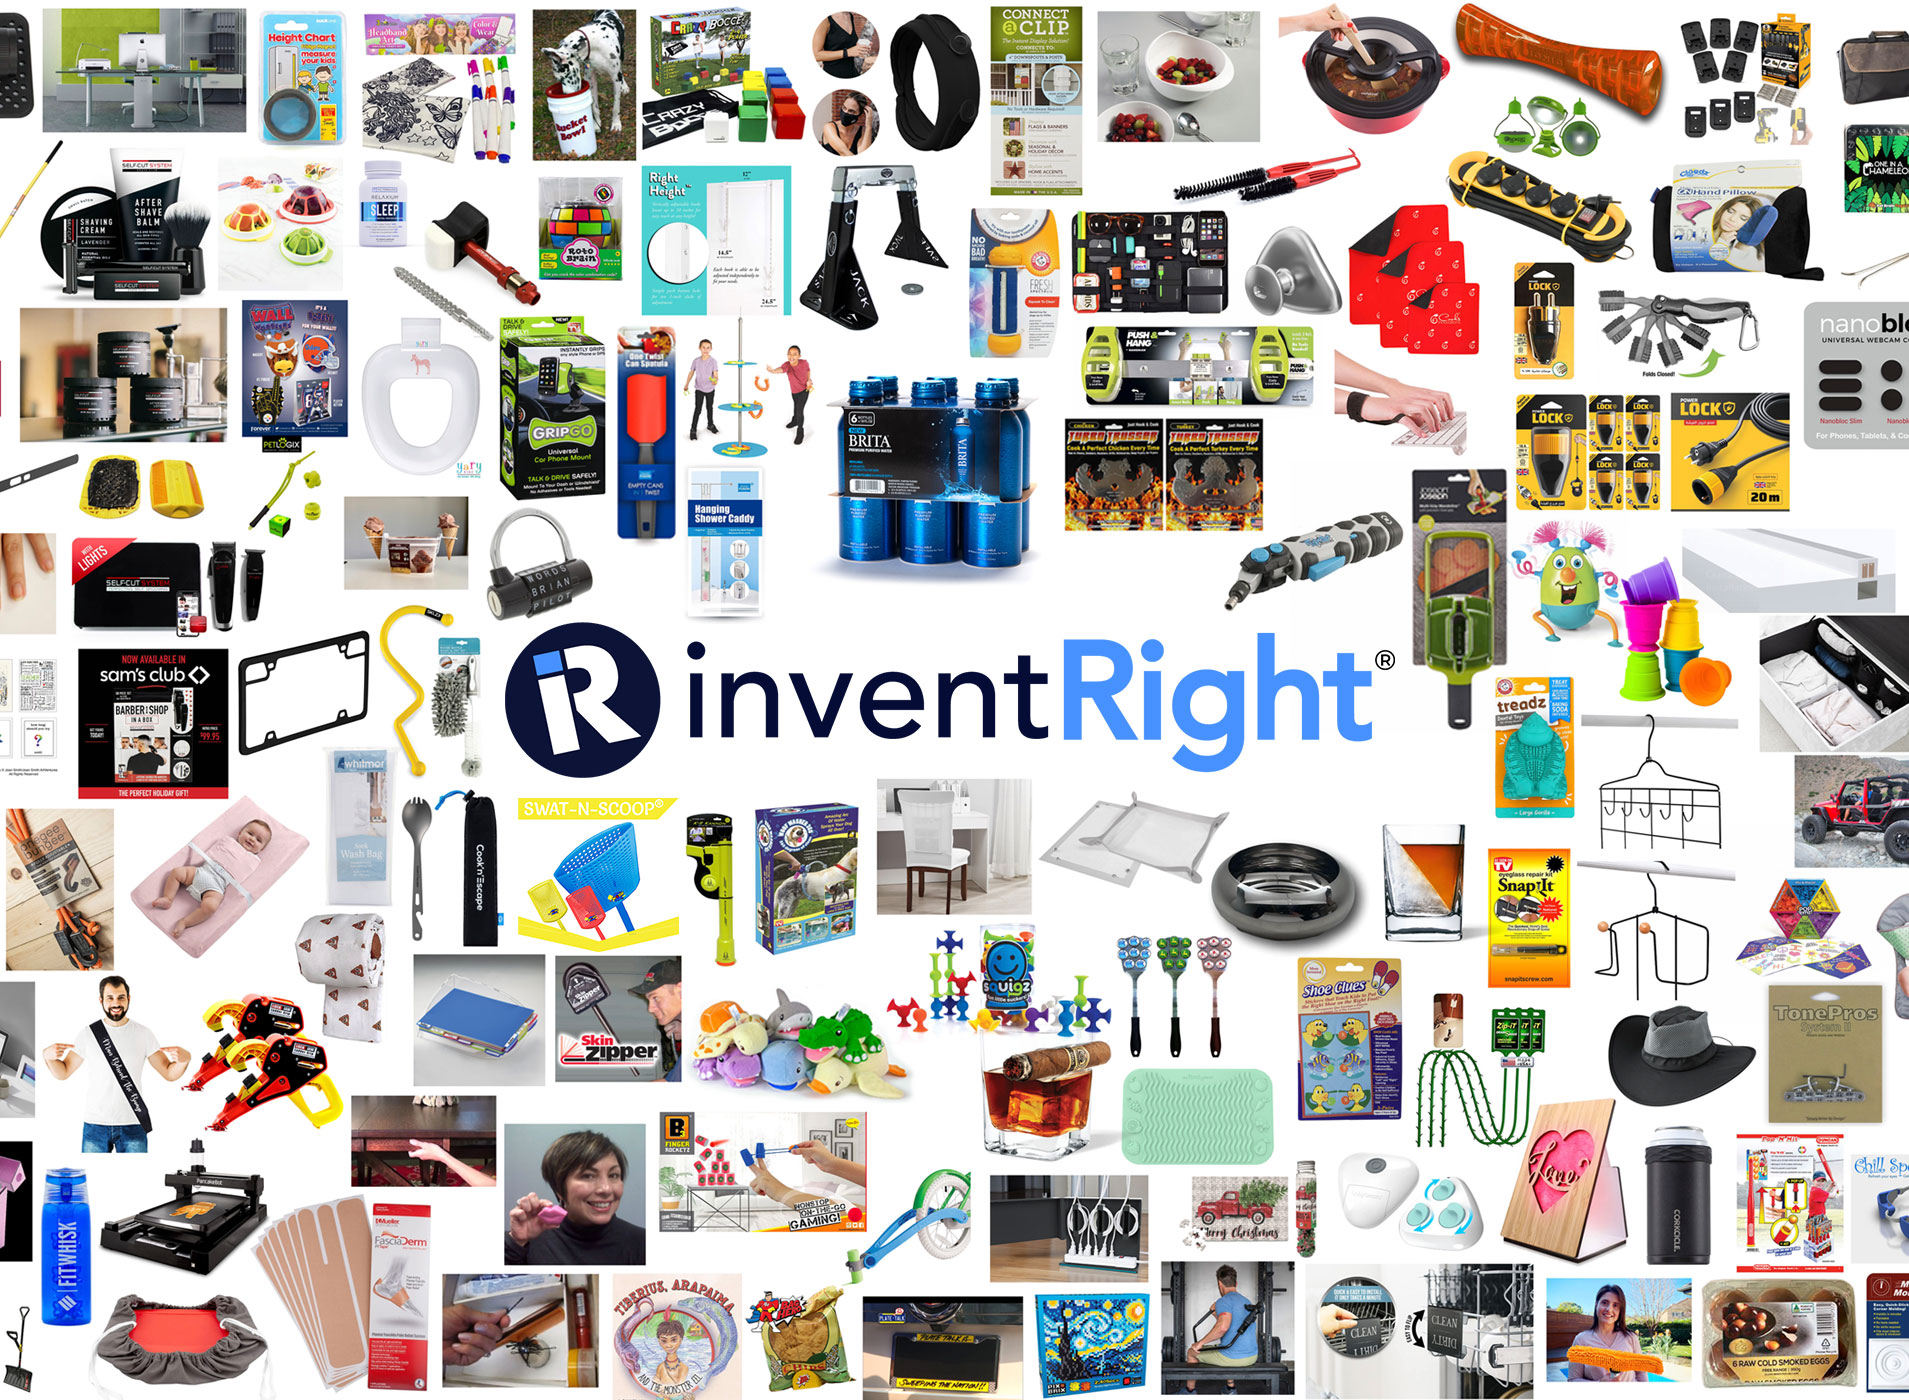 group of companies that work with inventRight